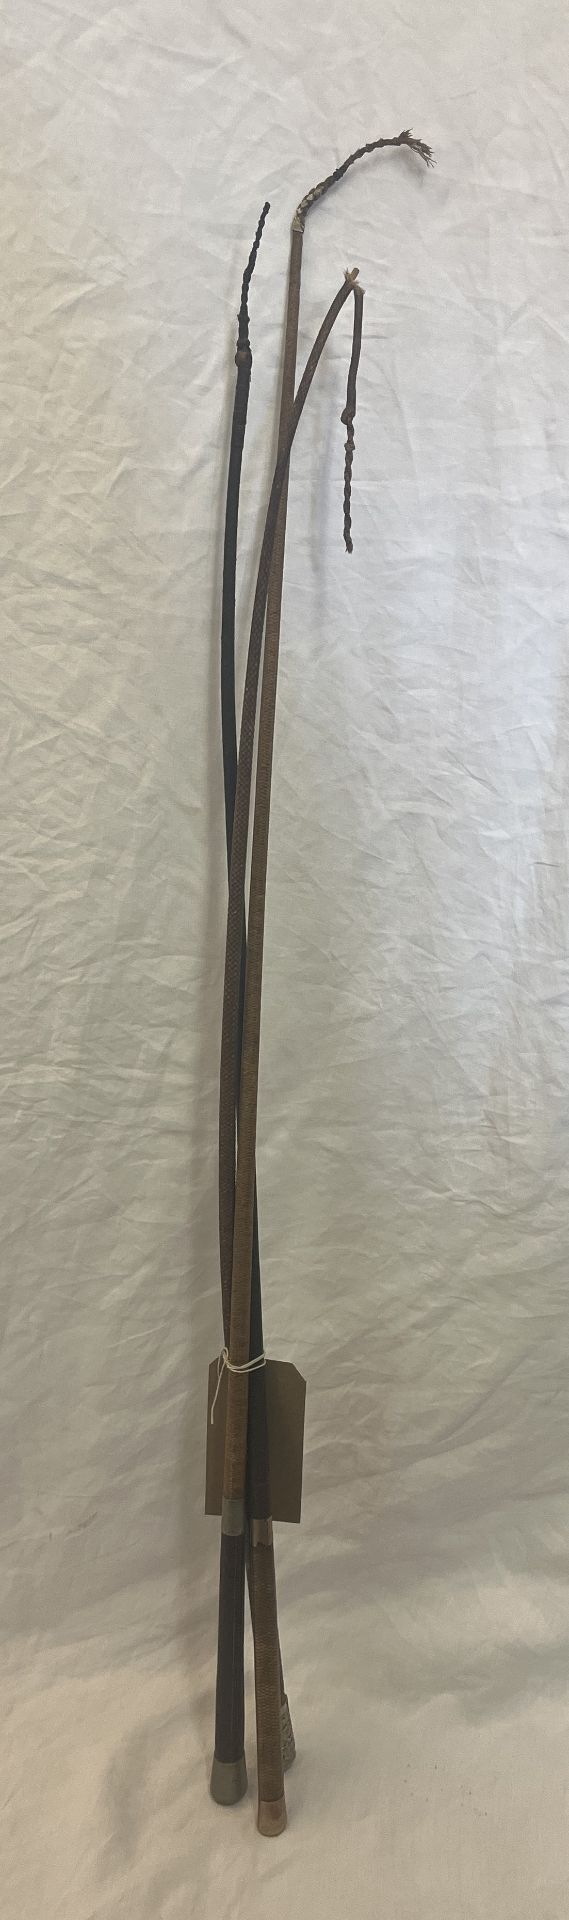 Lady's whip by Swaine & Adeney of London; Lady's whip with a silver end and another lady's whip